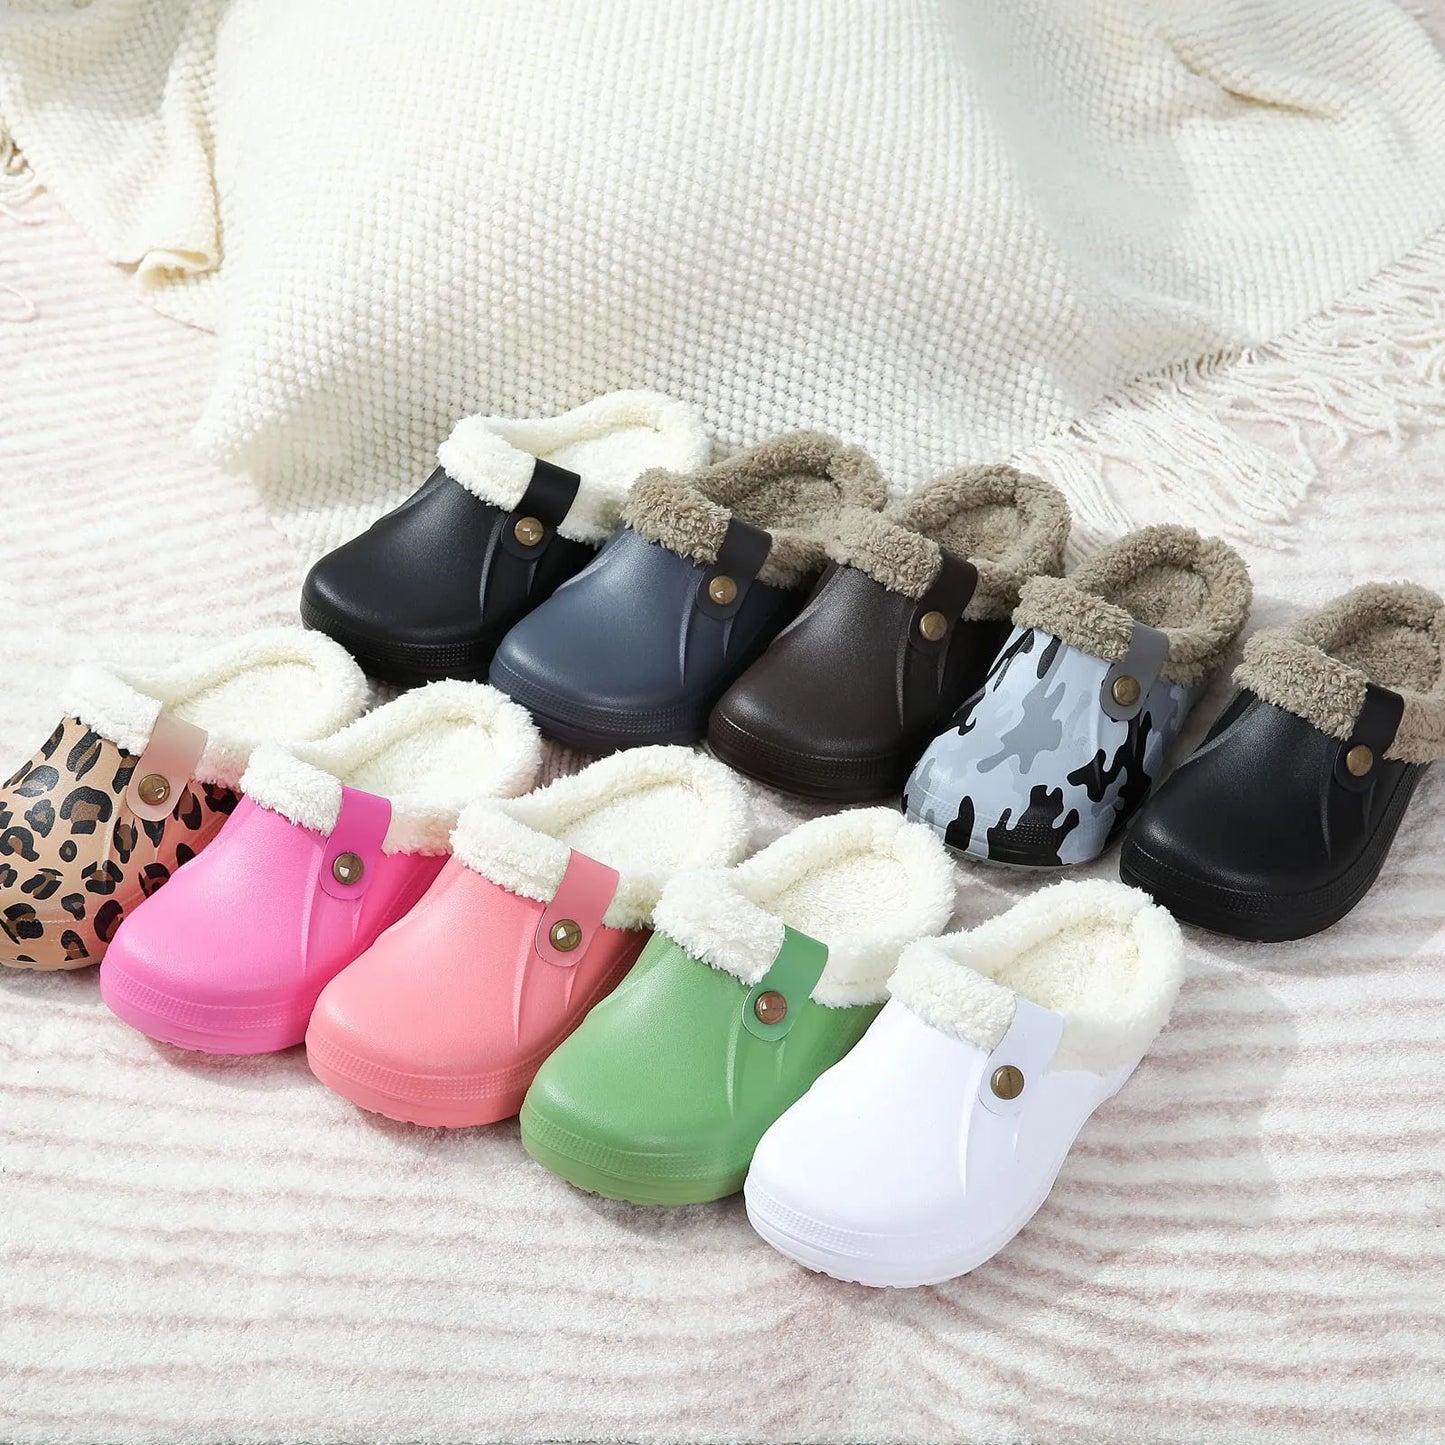 Shevalues Plush Fur Clogs Slippers Multi-Use Indoor Home Shoes